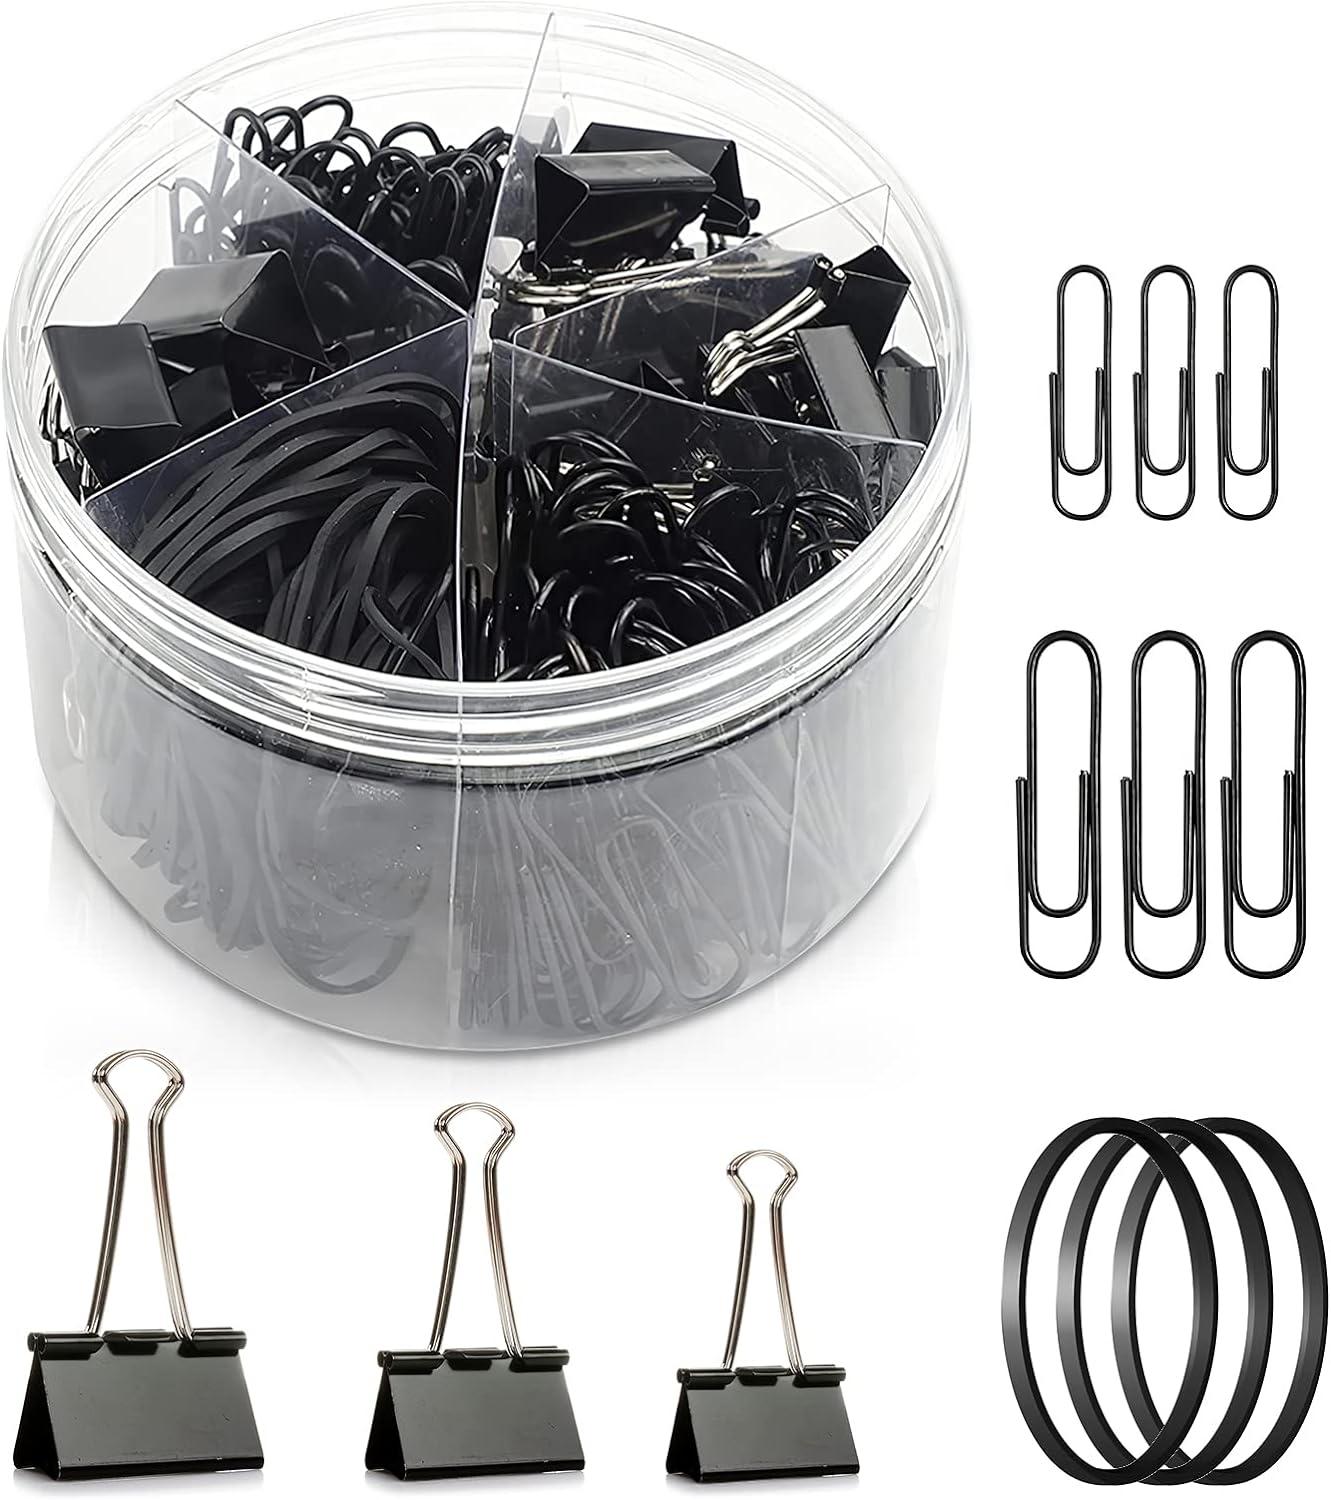 paper clips binder clips 240pcs black office clips set - assorted sizes paperclips paper clamps rubber bands